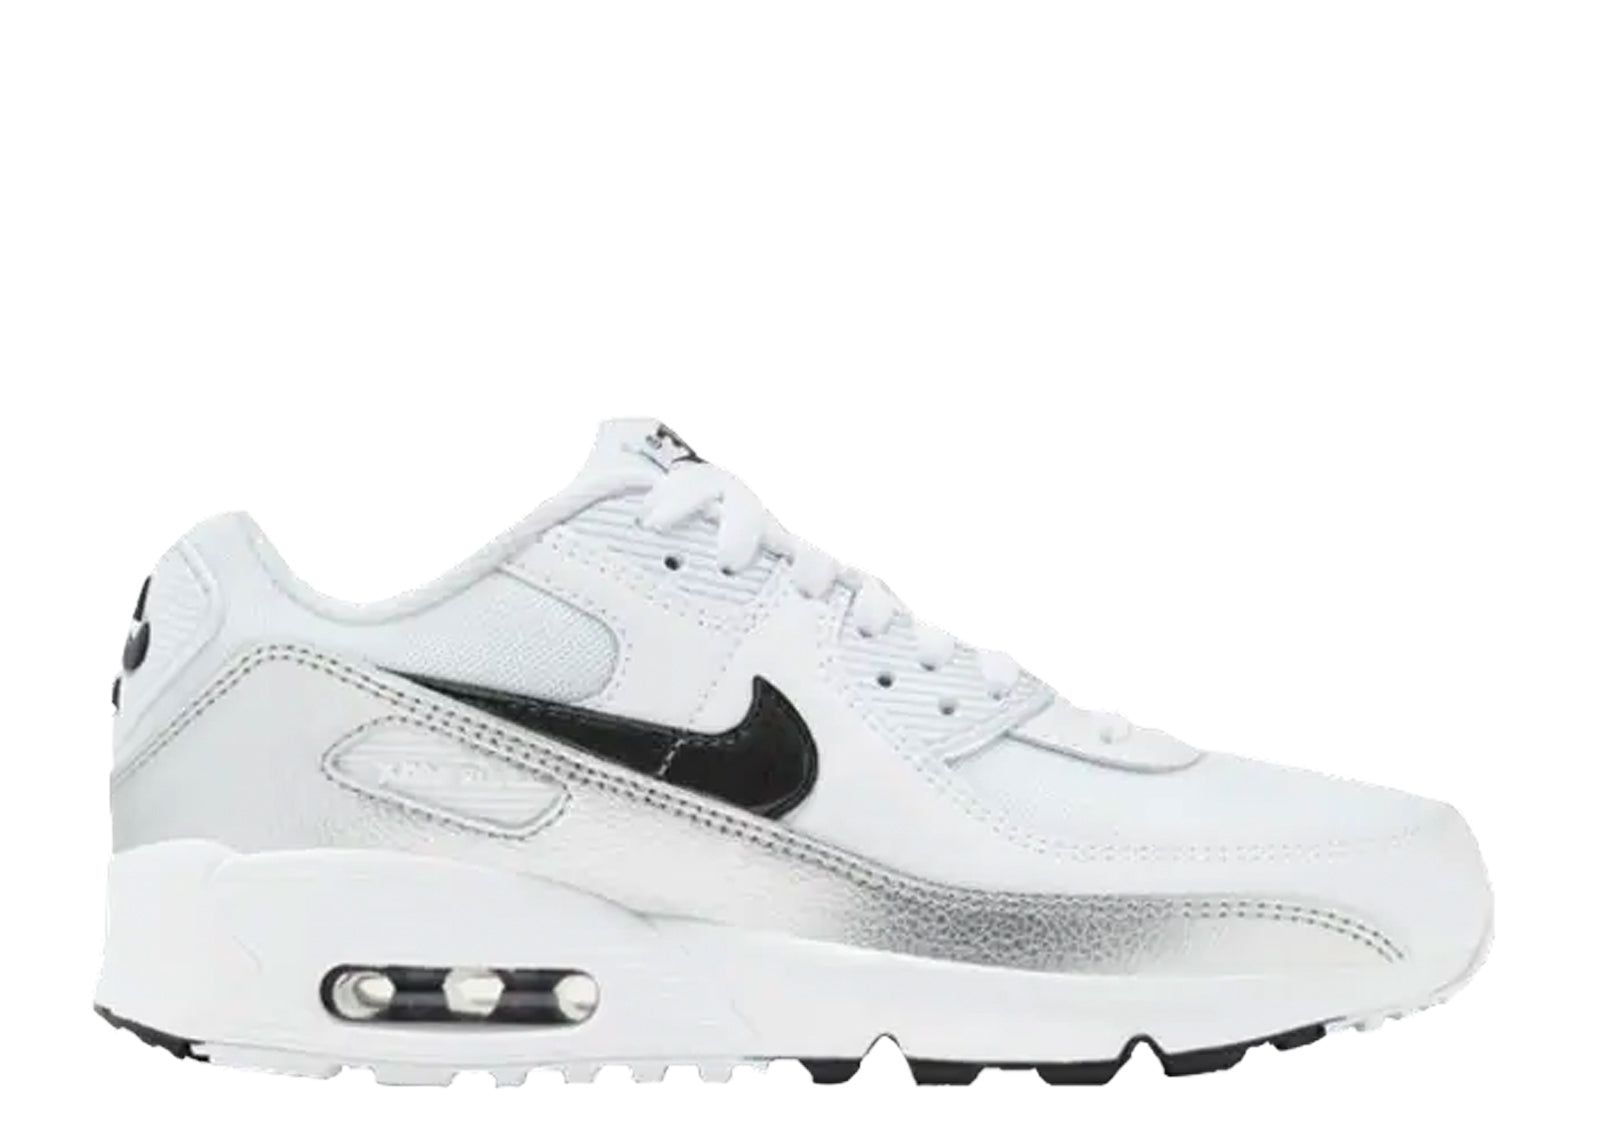 Second Chance - Nike Sneakers TG-39-07-000397 601 White & Black (GS) - 39 | NEW